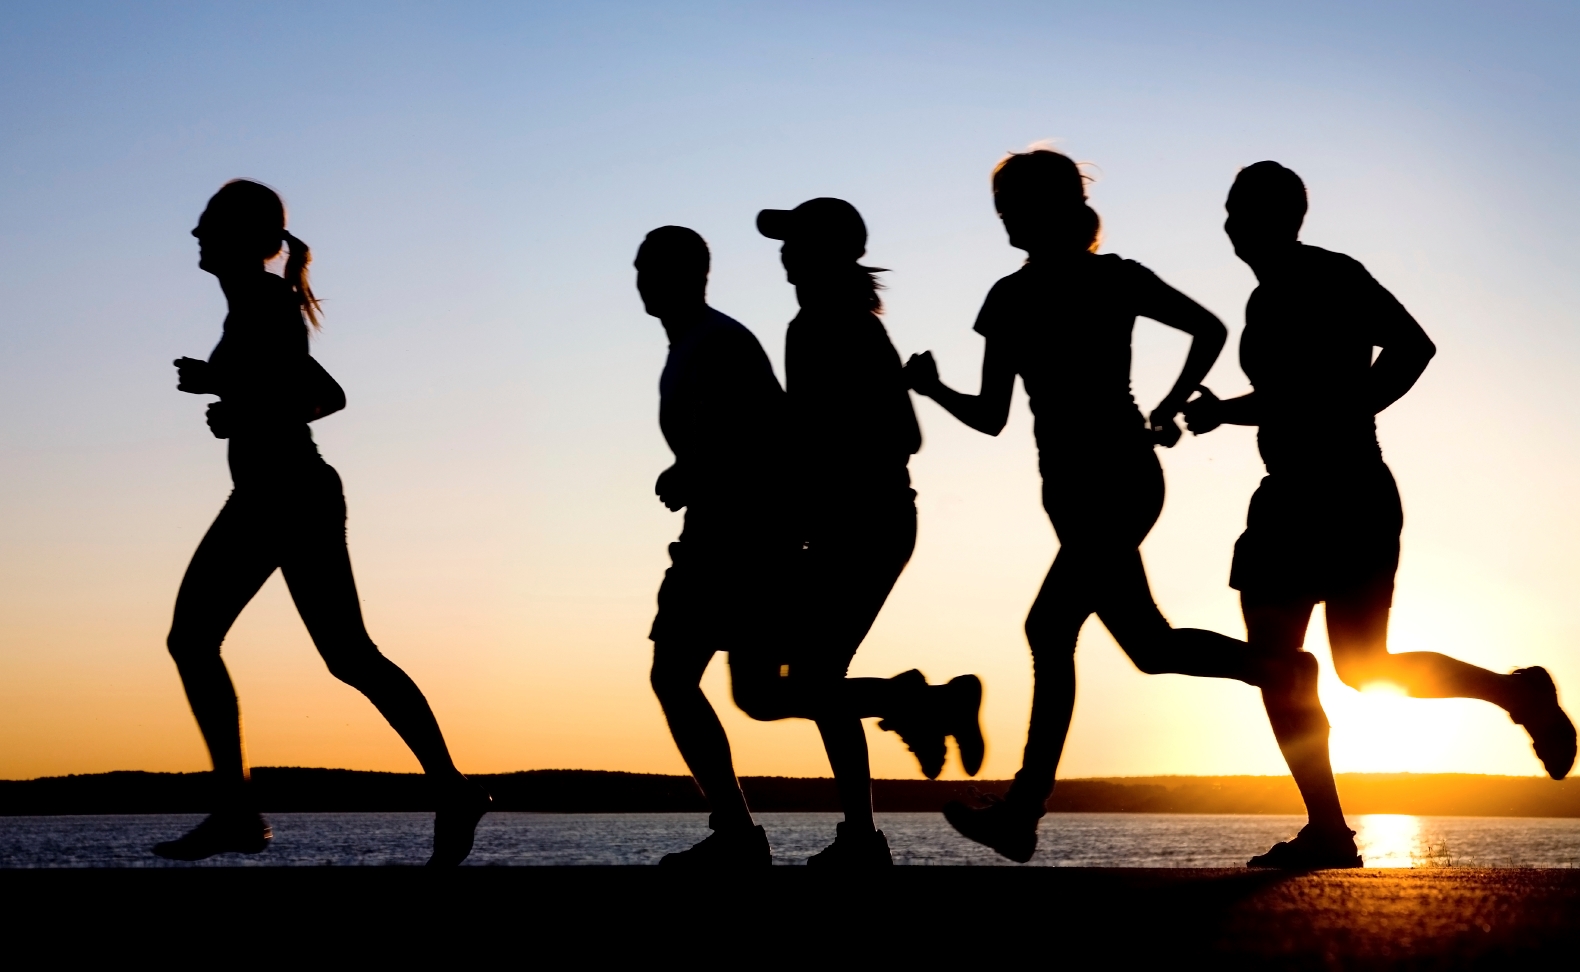 Good Morning Runners  Race Training This Fall  4 Ways To Train Smarter